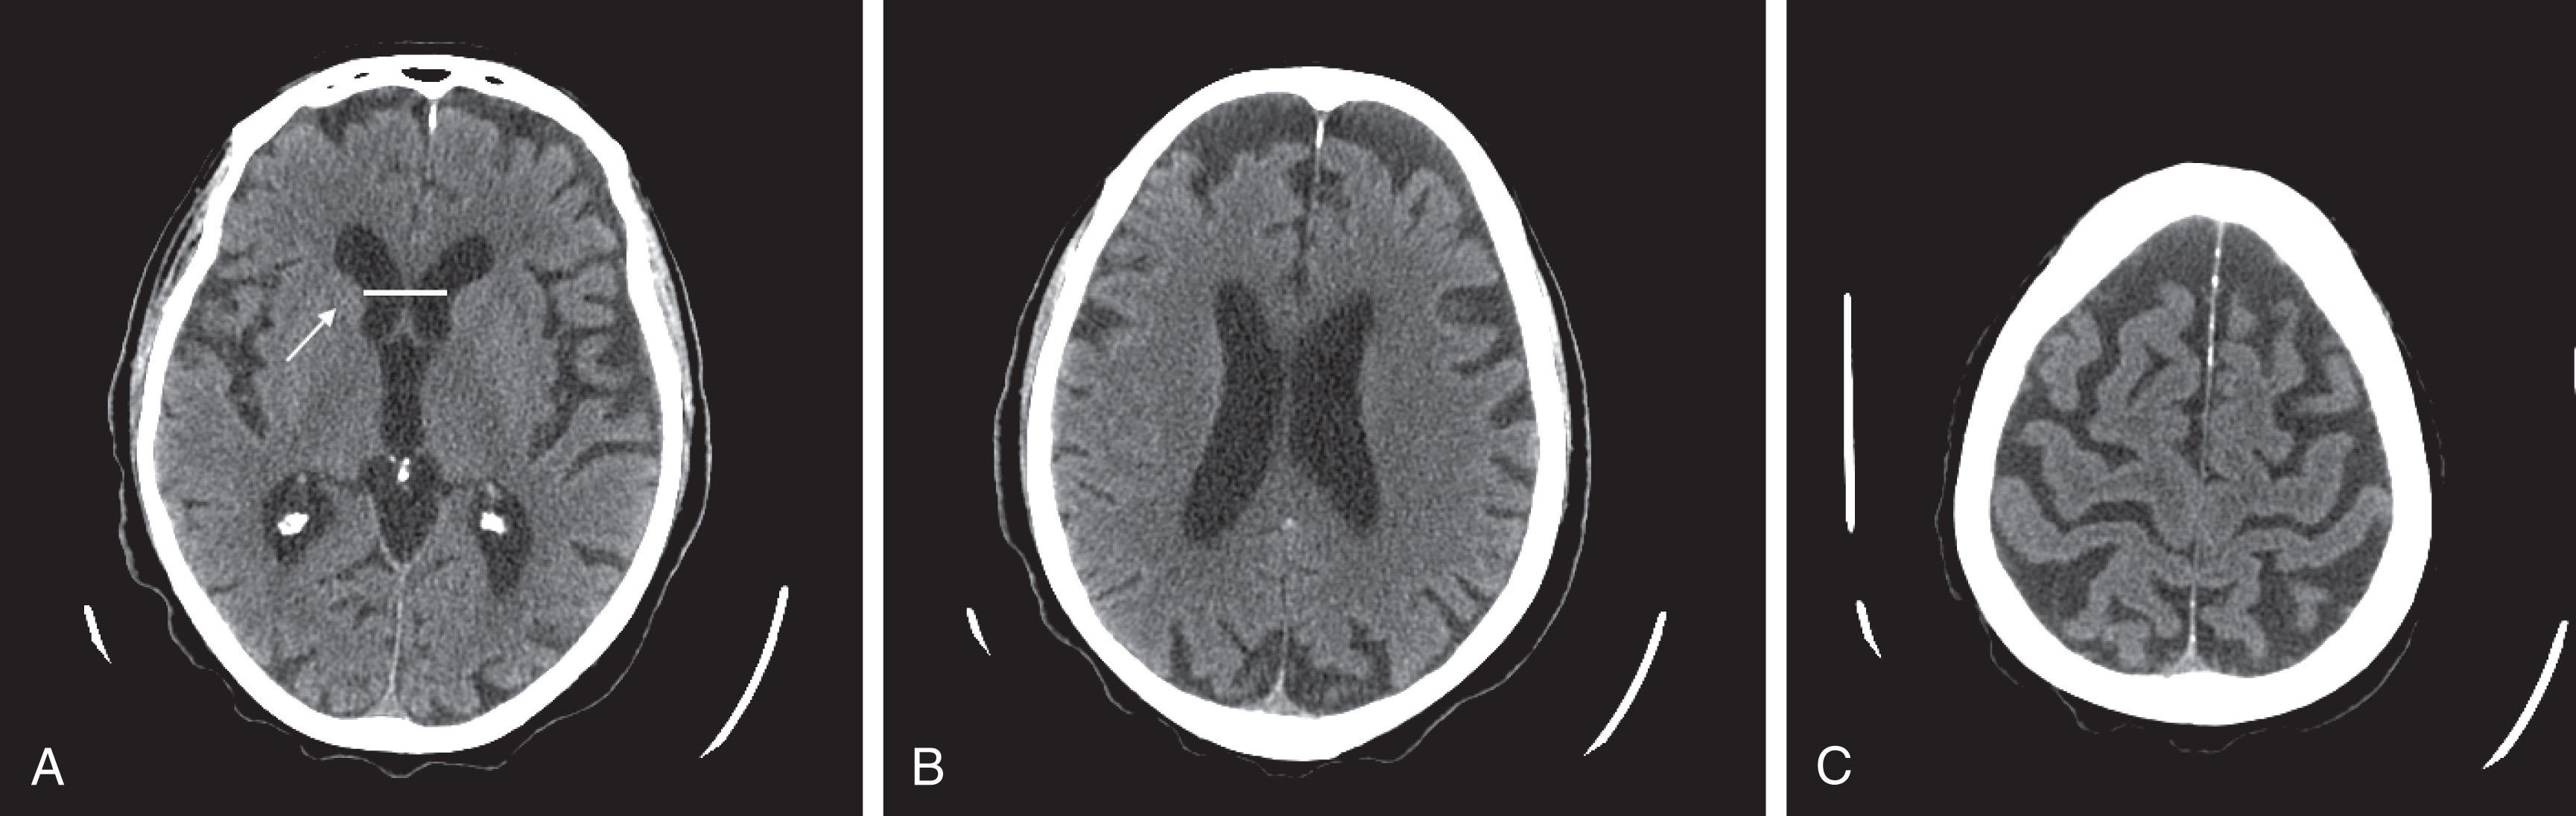 Fig. 20.3, These three progressively higher (left to right) CT images show that cerebral atrophy leads to expansion of the lateral ventricles (horizontal line) and widening of the third ventricle— hydrocephalus ex vacuo —as well as thinning of cerebral gyri and widening of sulci (right-most image). Nevertheless, as the left-most image shows, the head of the caudate nucleus (arrow) maintains its normal volume and continues to indent the lateral border of the lateral ventricle. In Huntington disease, by way of contrast, the characteristic atrophy of the head of the caudate nuclei allows the ventricles to bow outward (see Fig. 20.5 ).